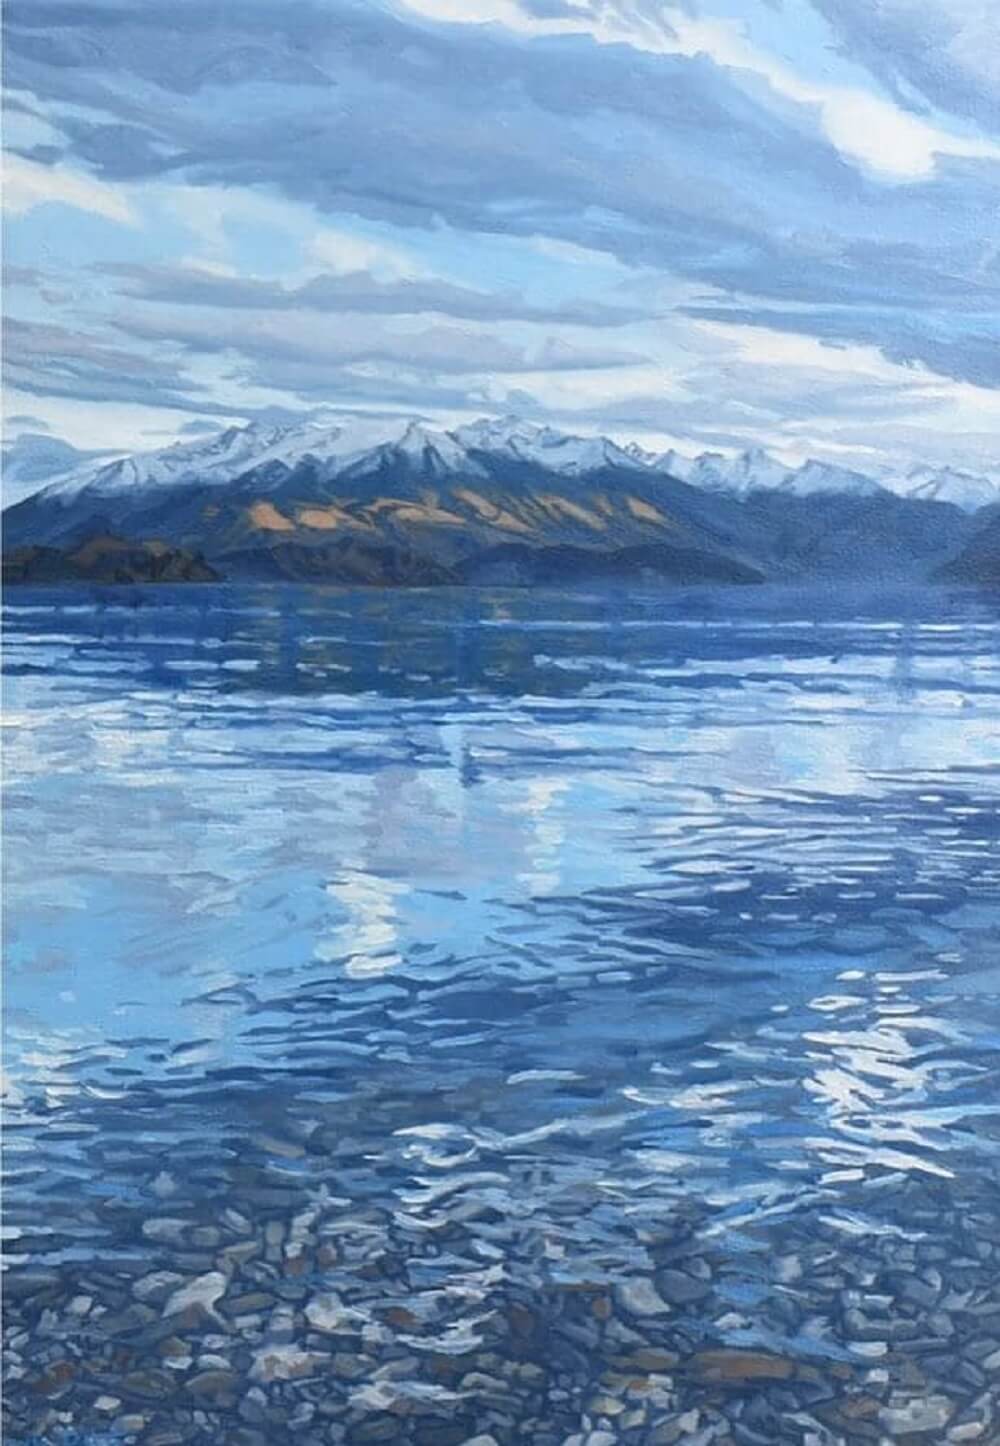 Painting of lake in NZ with mountains in background.